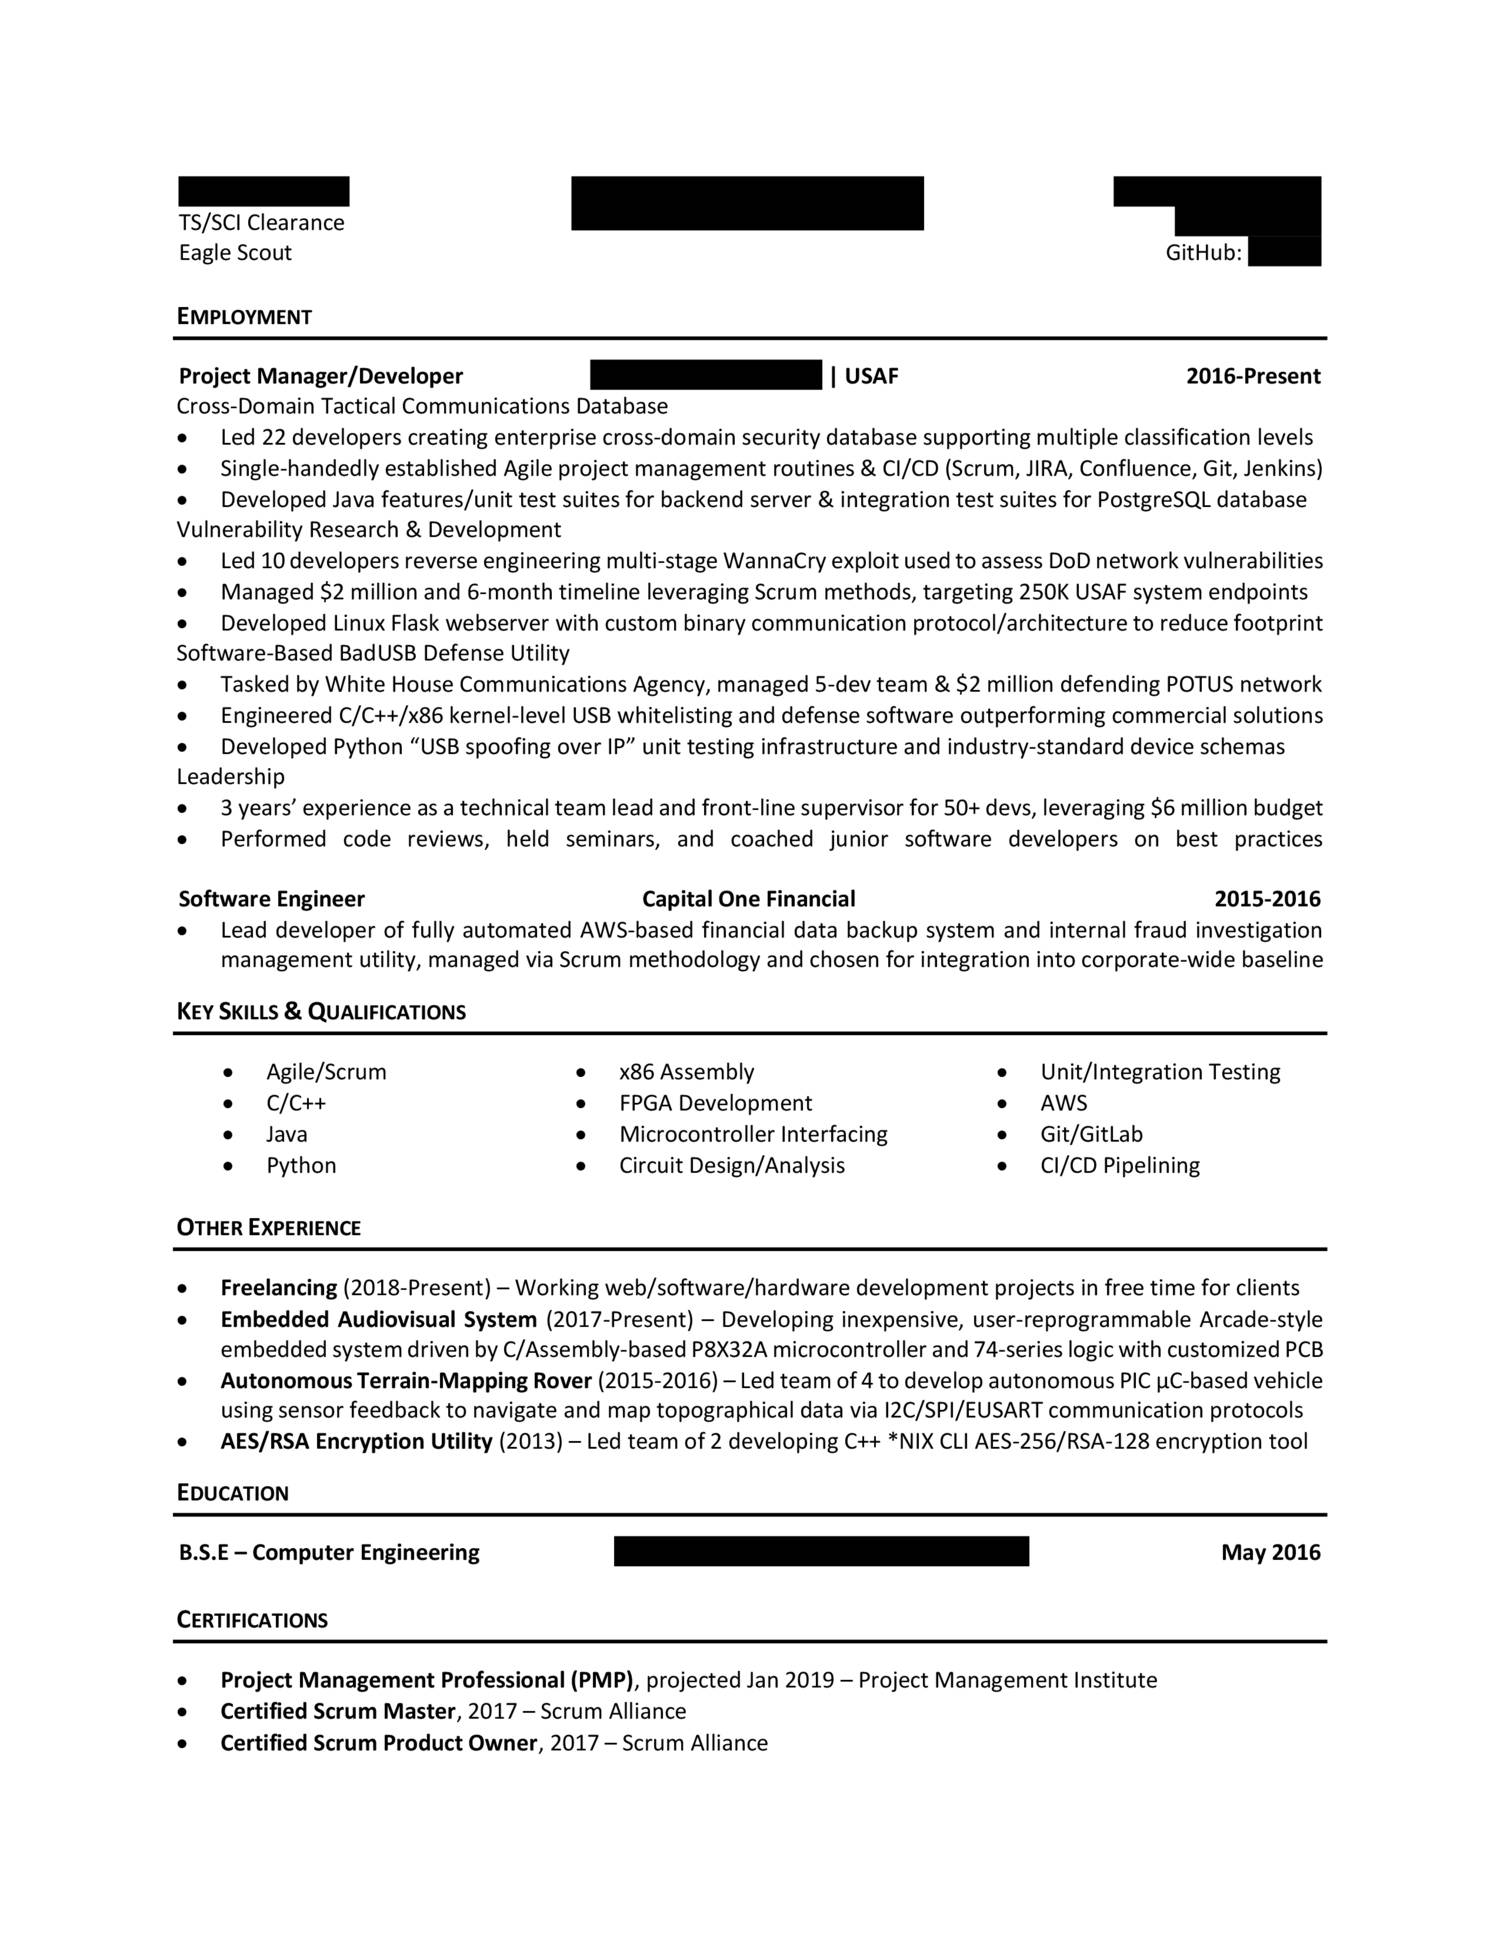 Technical Project Manager Resume.pdf  DocDroid